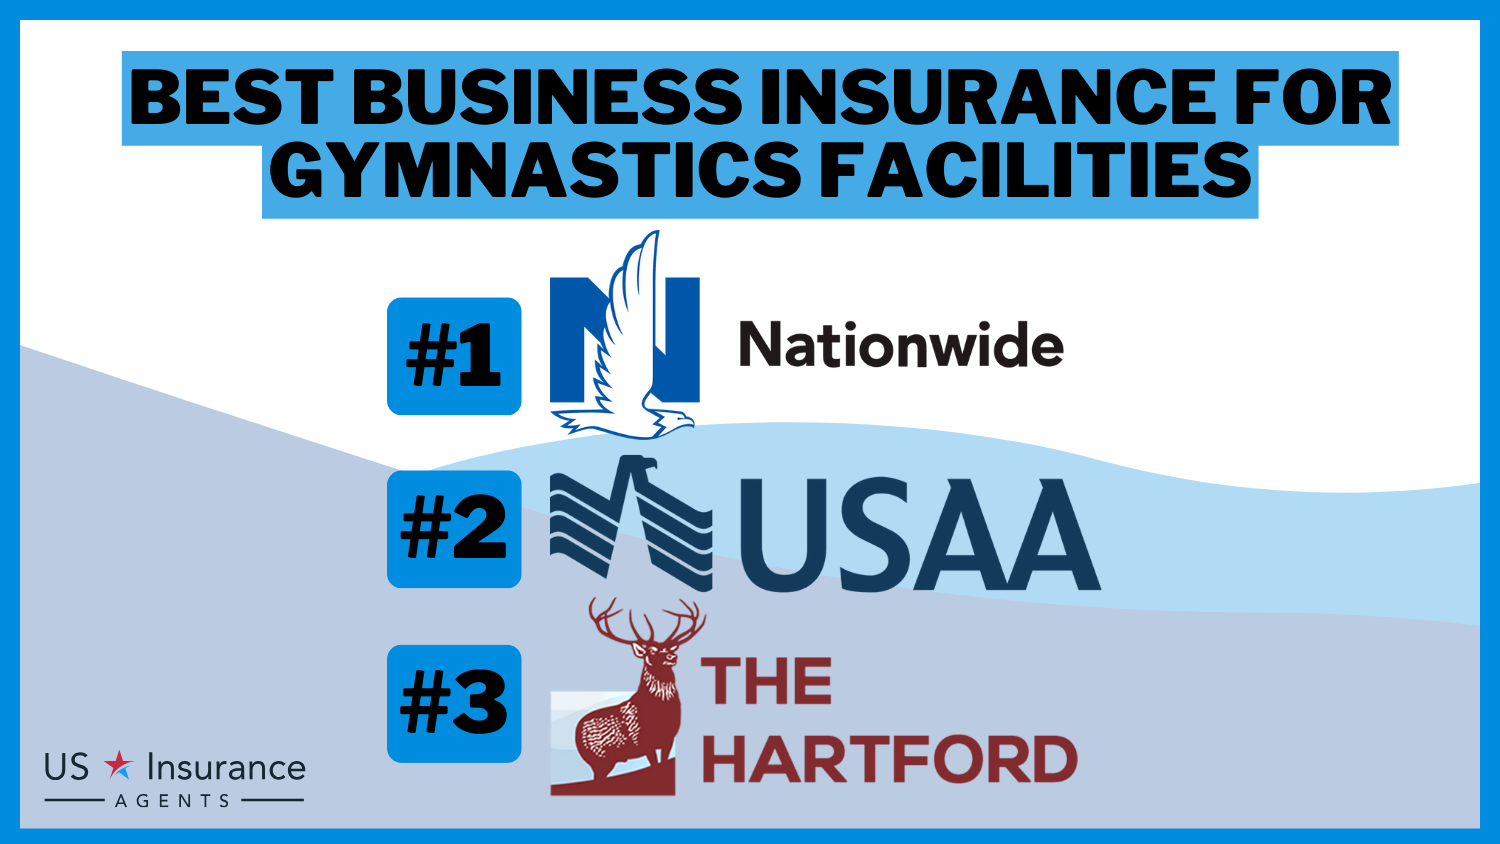 3 Best Business Insurance for Gymnastics Facilities: Nationwide, USAA and The Hartford.